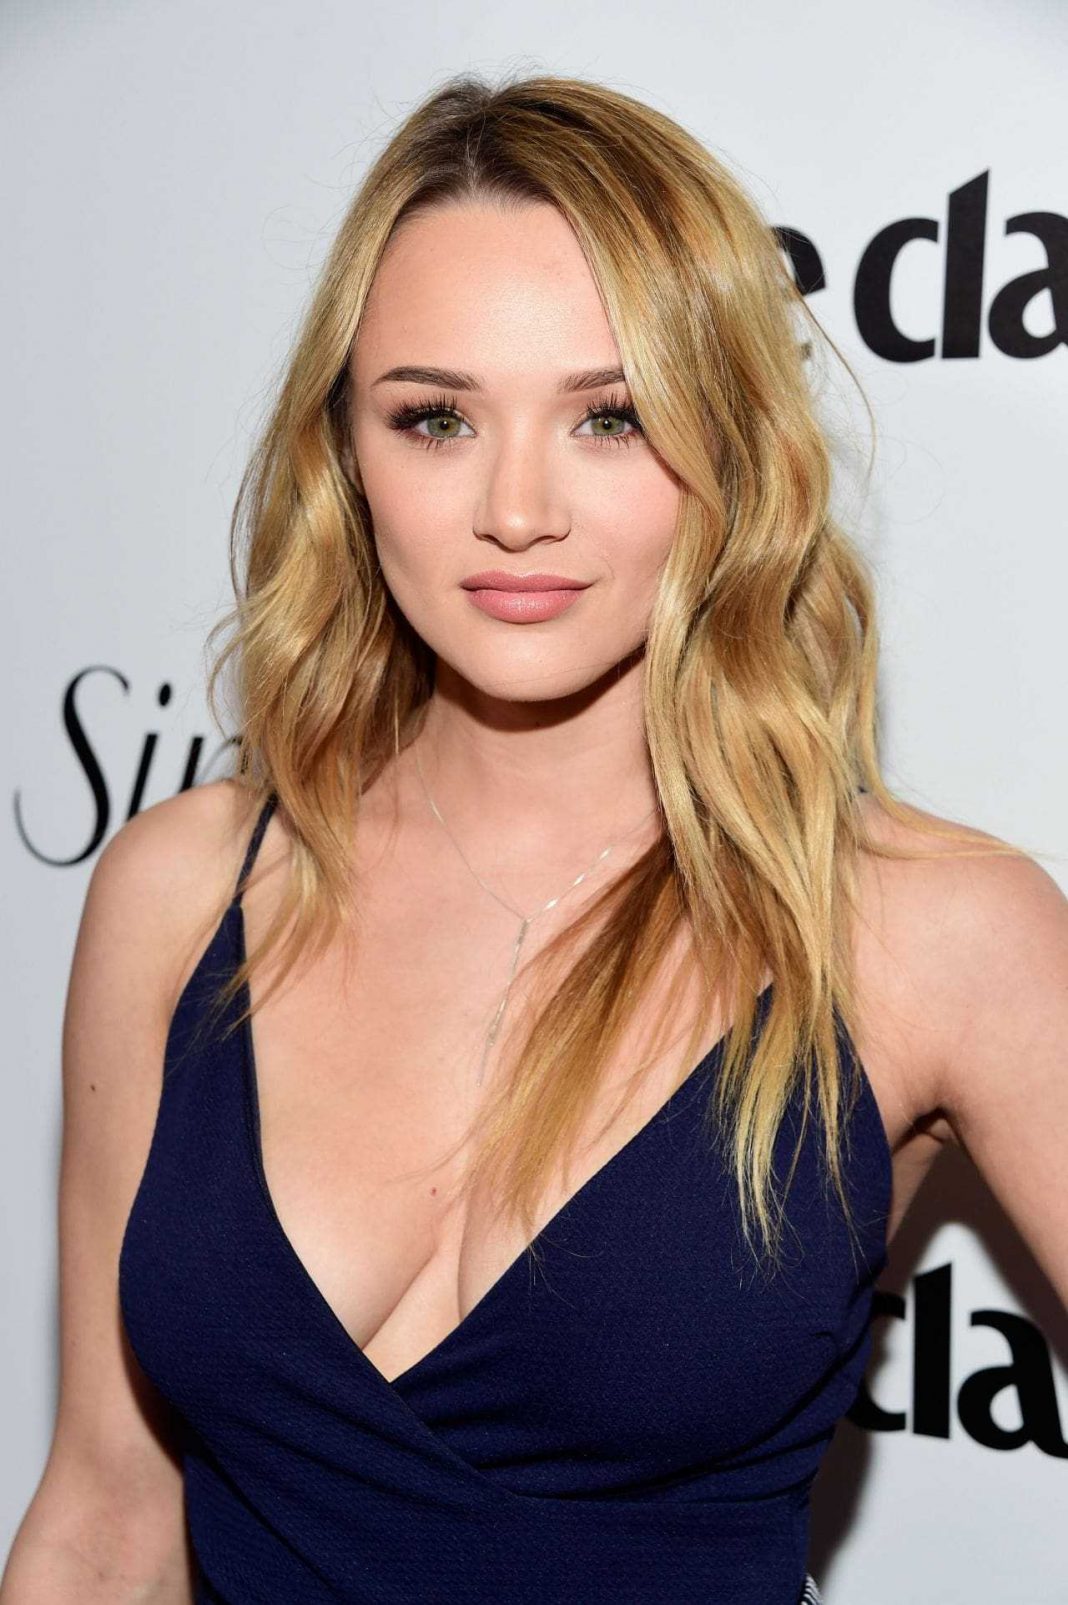 51 Hunter King Nude Pictures Display Her As A Skilled Performer 105